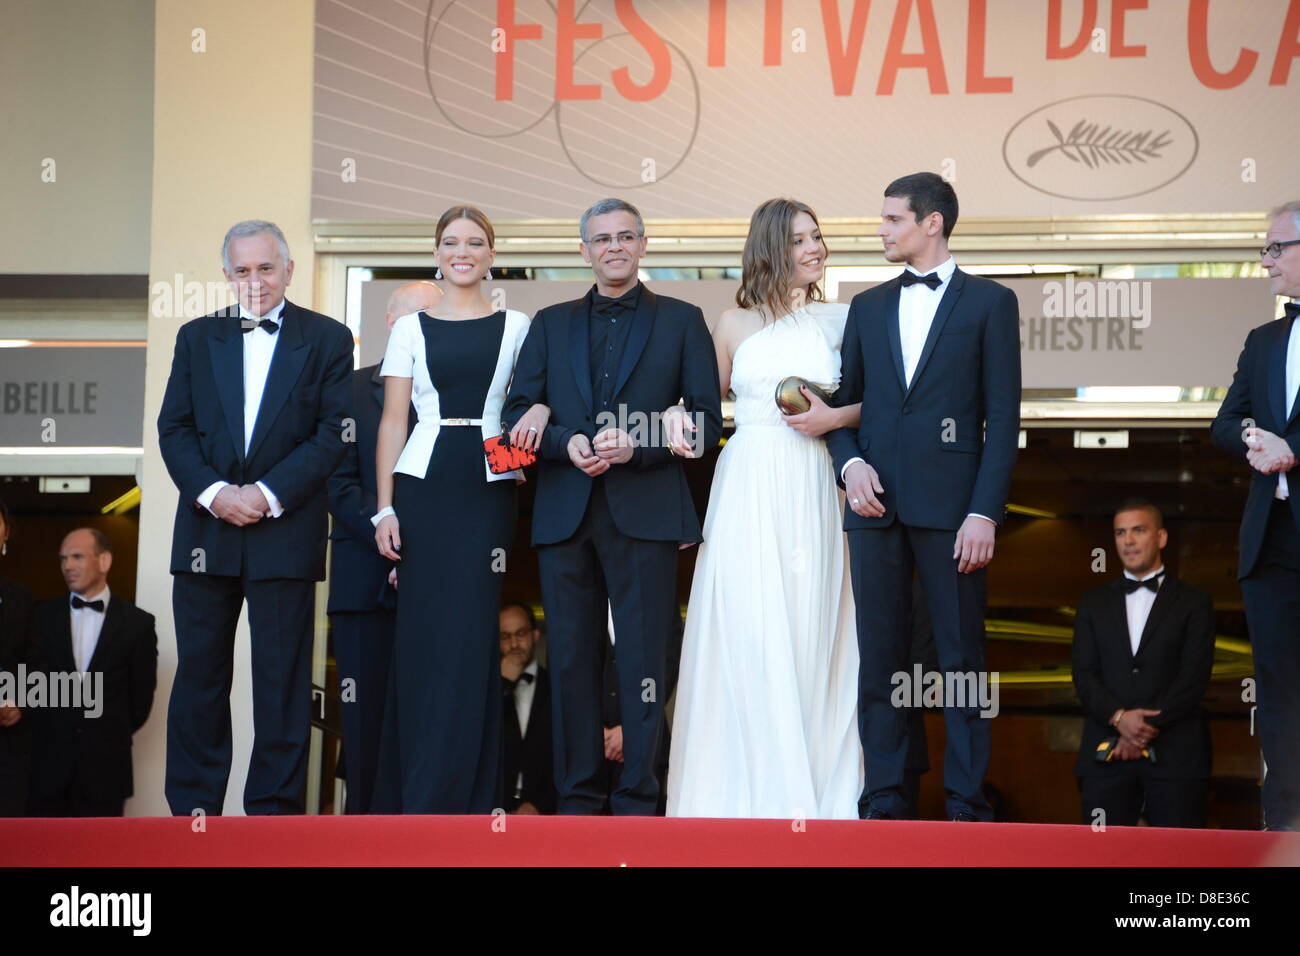 Cannes, France. May 26, 2013. (L-R) Actors Jeremie Laheurte, Adele Exarchopoulos, director Abdellatif Kechiche, actress Lea Seydoux and producer Brahim Chioua attend the Premiere of 'Zulu' and the Closing Ceremony of The 66th Annual Cannes Film Festival at Palais des Festivals on May 26, 2013 in Cannes, France. (Credit Image: Credit:  Frederick Injimbert/ZUMAPRESS.com/Alamy Live News) Stock Photo